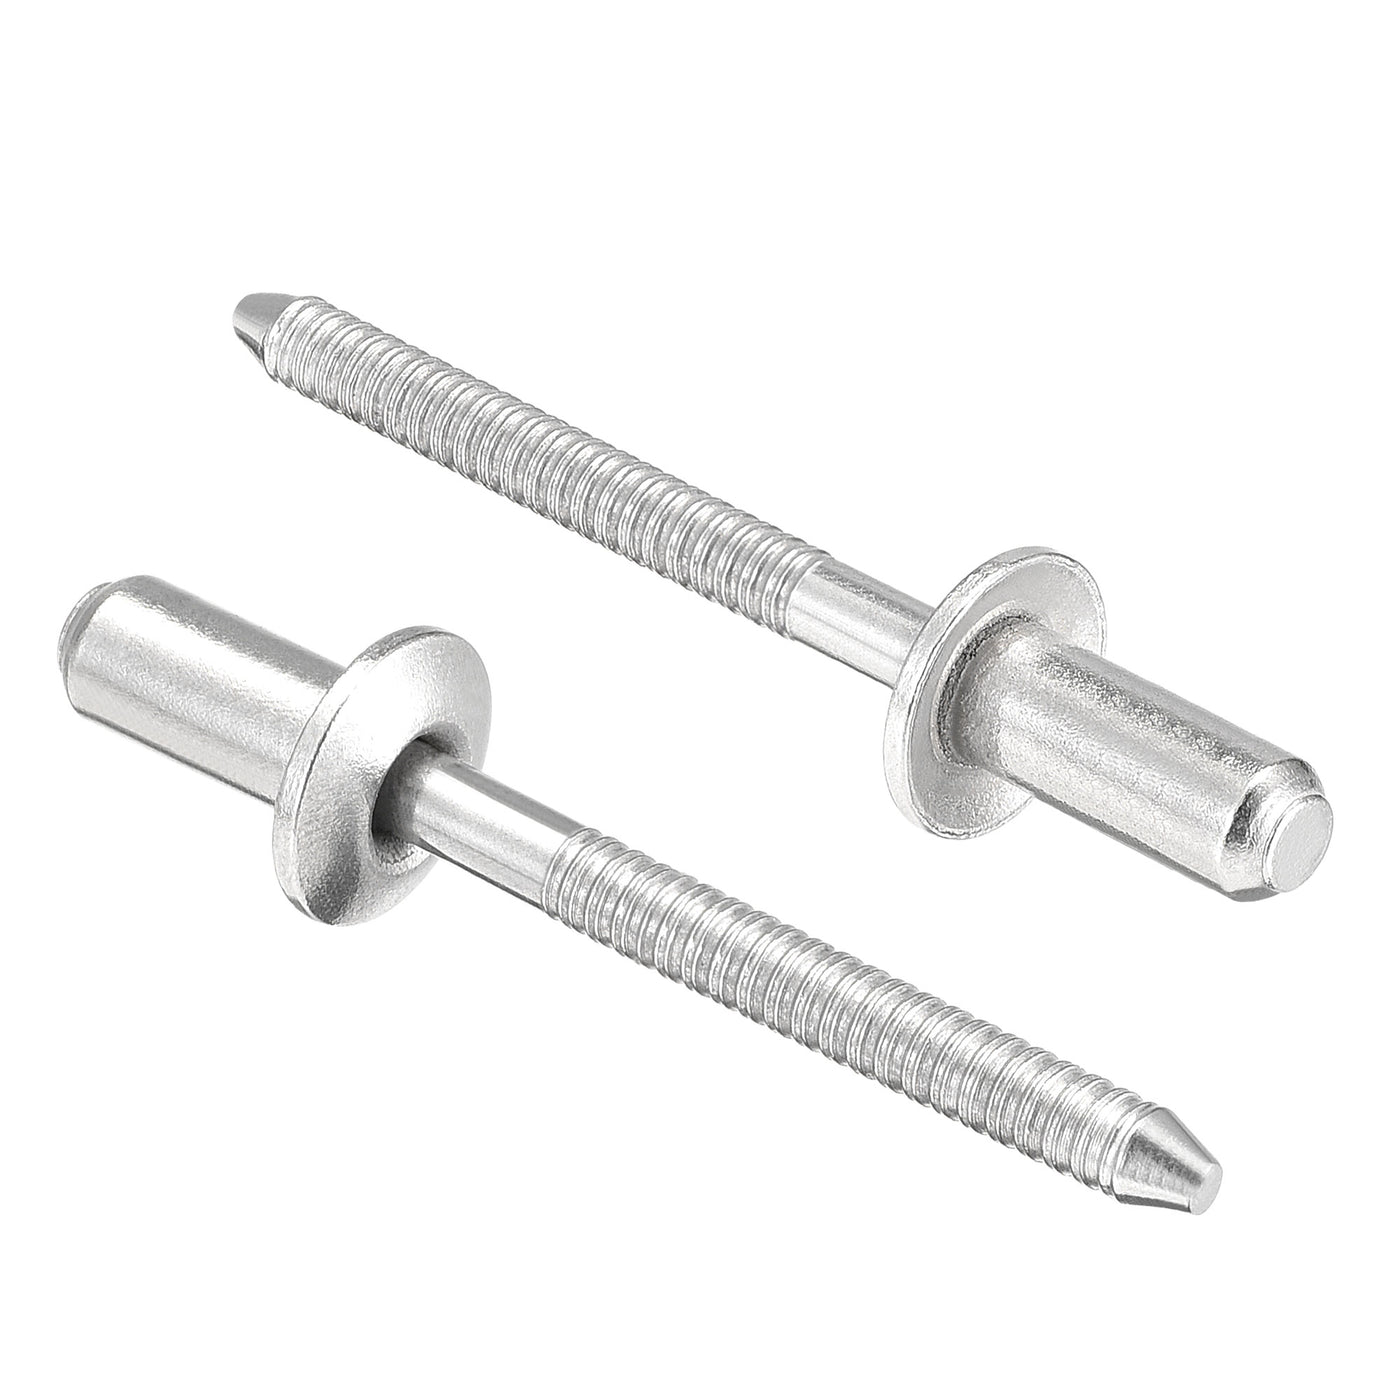 uxcell Uxcell Blind Rivets 304 Stainless Steel 4.8mm Diameter 11mm Grip Length 25pcs